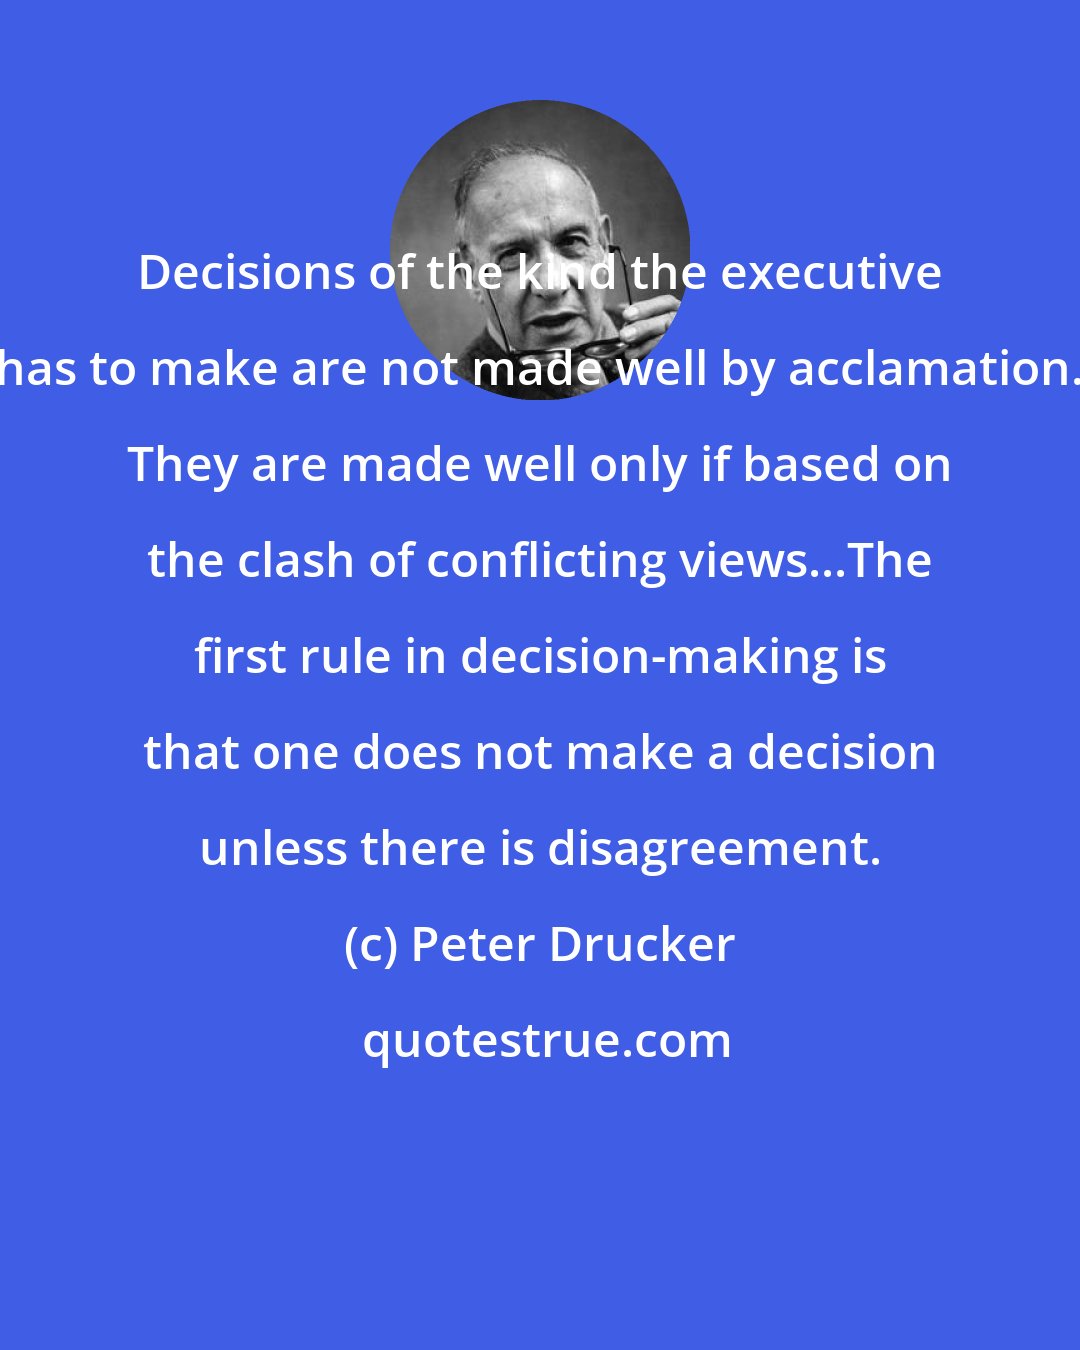 Peter Drucker: Decisions of the kind the executive has to make are not made well by acclamation. They are made well only if based on the clash of conflicting views...The first rule in decision-making is that one does not make a decision unless there is disagreement.